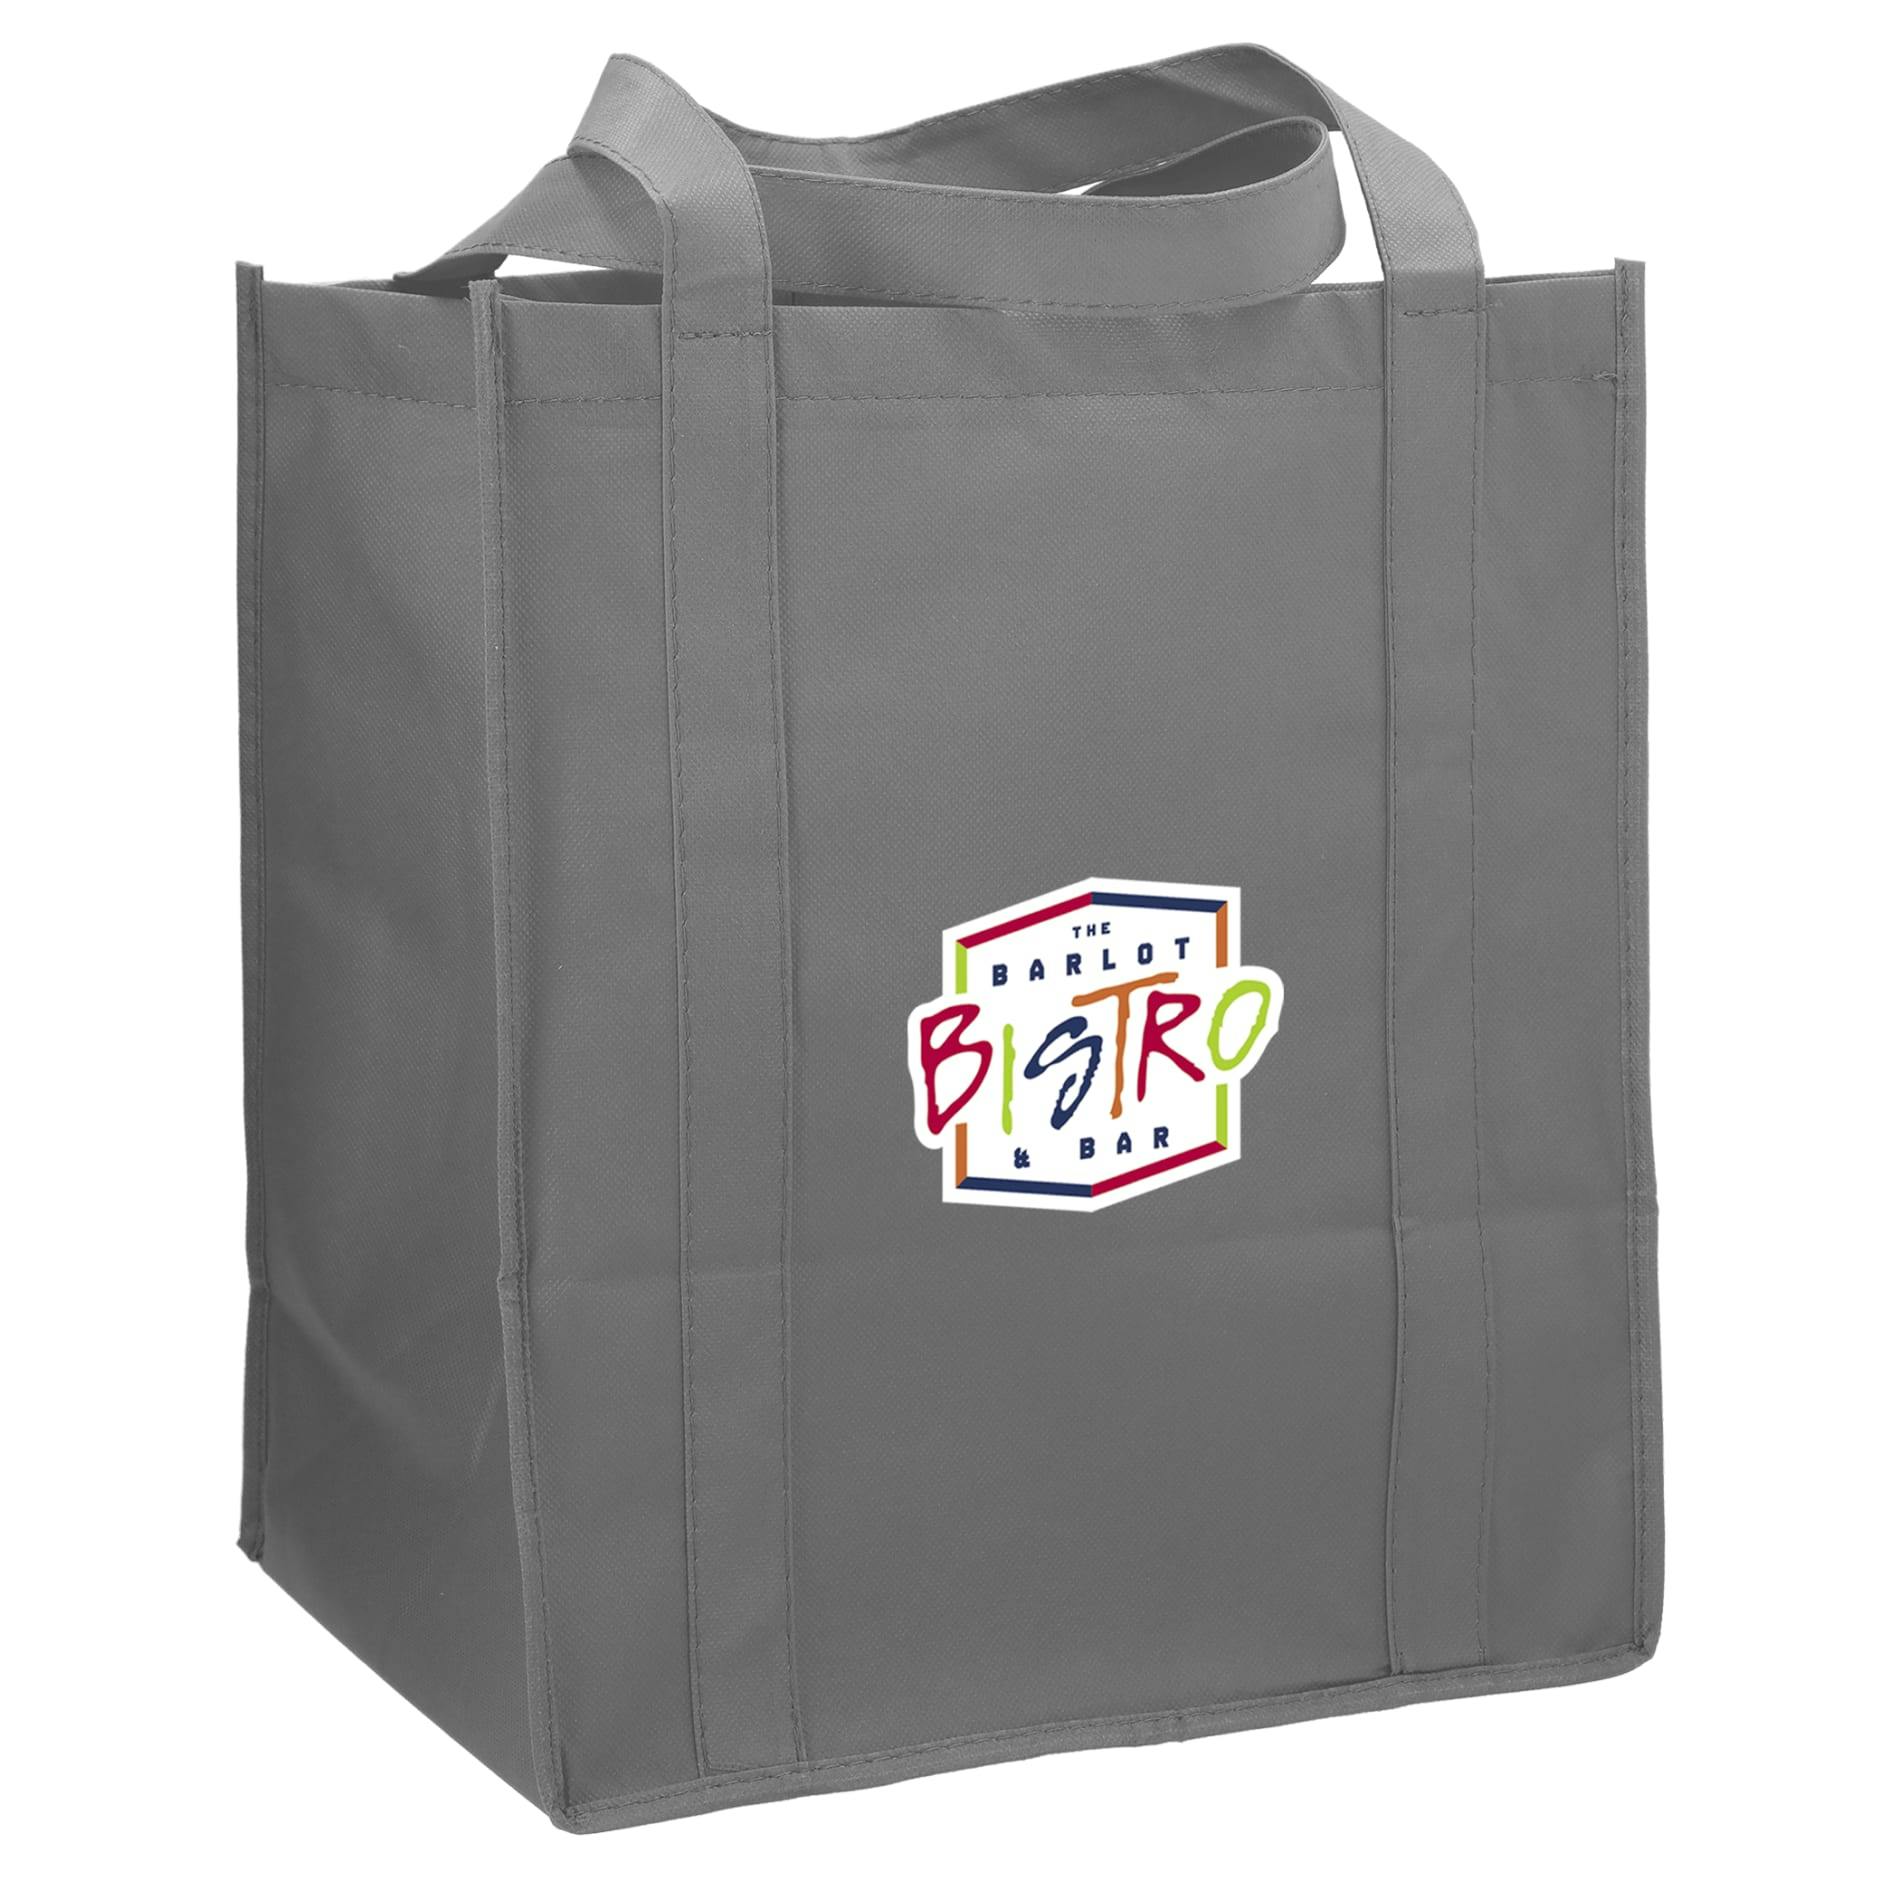 Little Juno Non-Woven Grocery Tote - additional Image 1